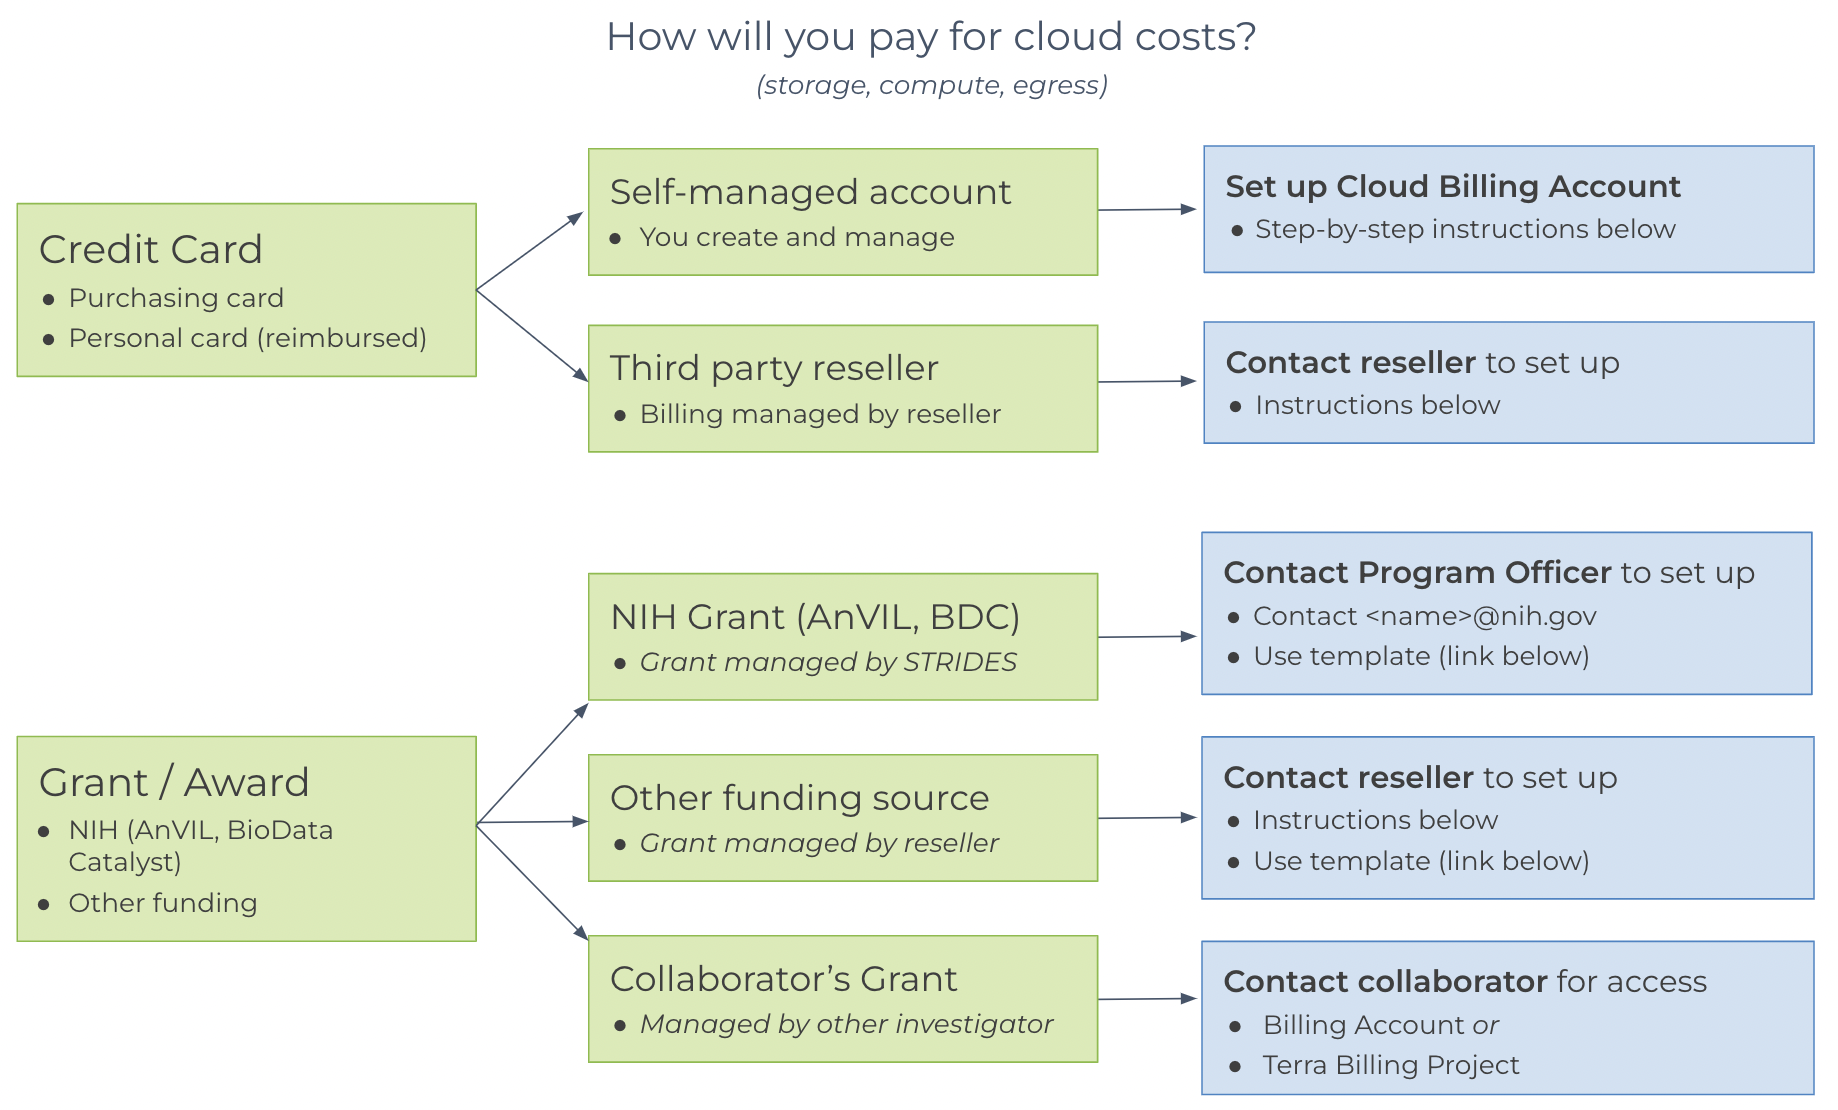 Diagram explaining how to set up billing in different situations. The left-most column shows a choice between paying with a credit card (with options for a self-managed account or a third-party reseller) and paying with a grant (with options for an NIH grant, another funding source, or a collaborator's grant). The general strategy for setting up billing is highlighted in blue boxes for each of these situations.